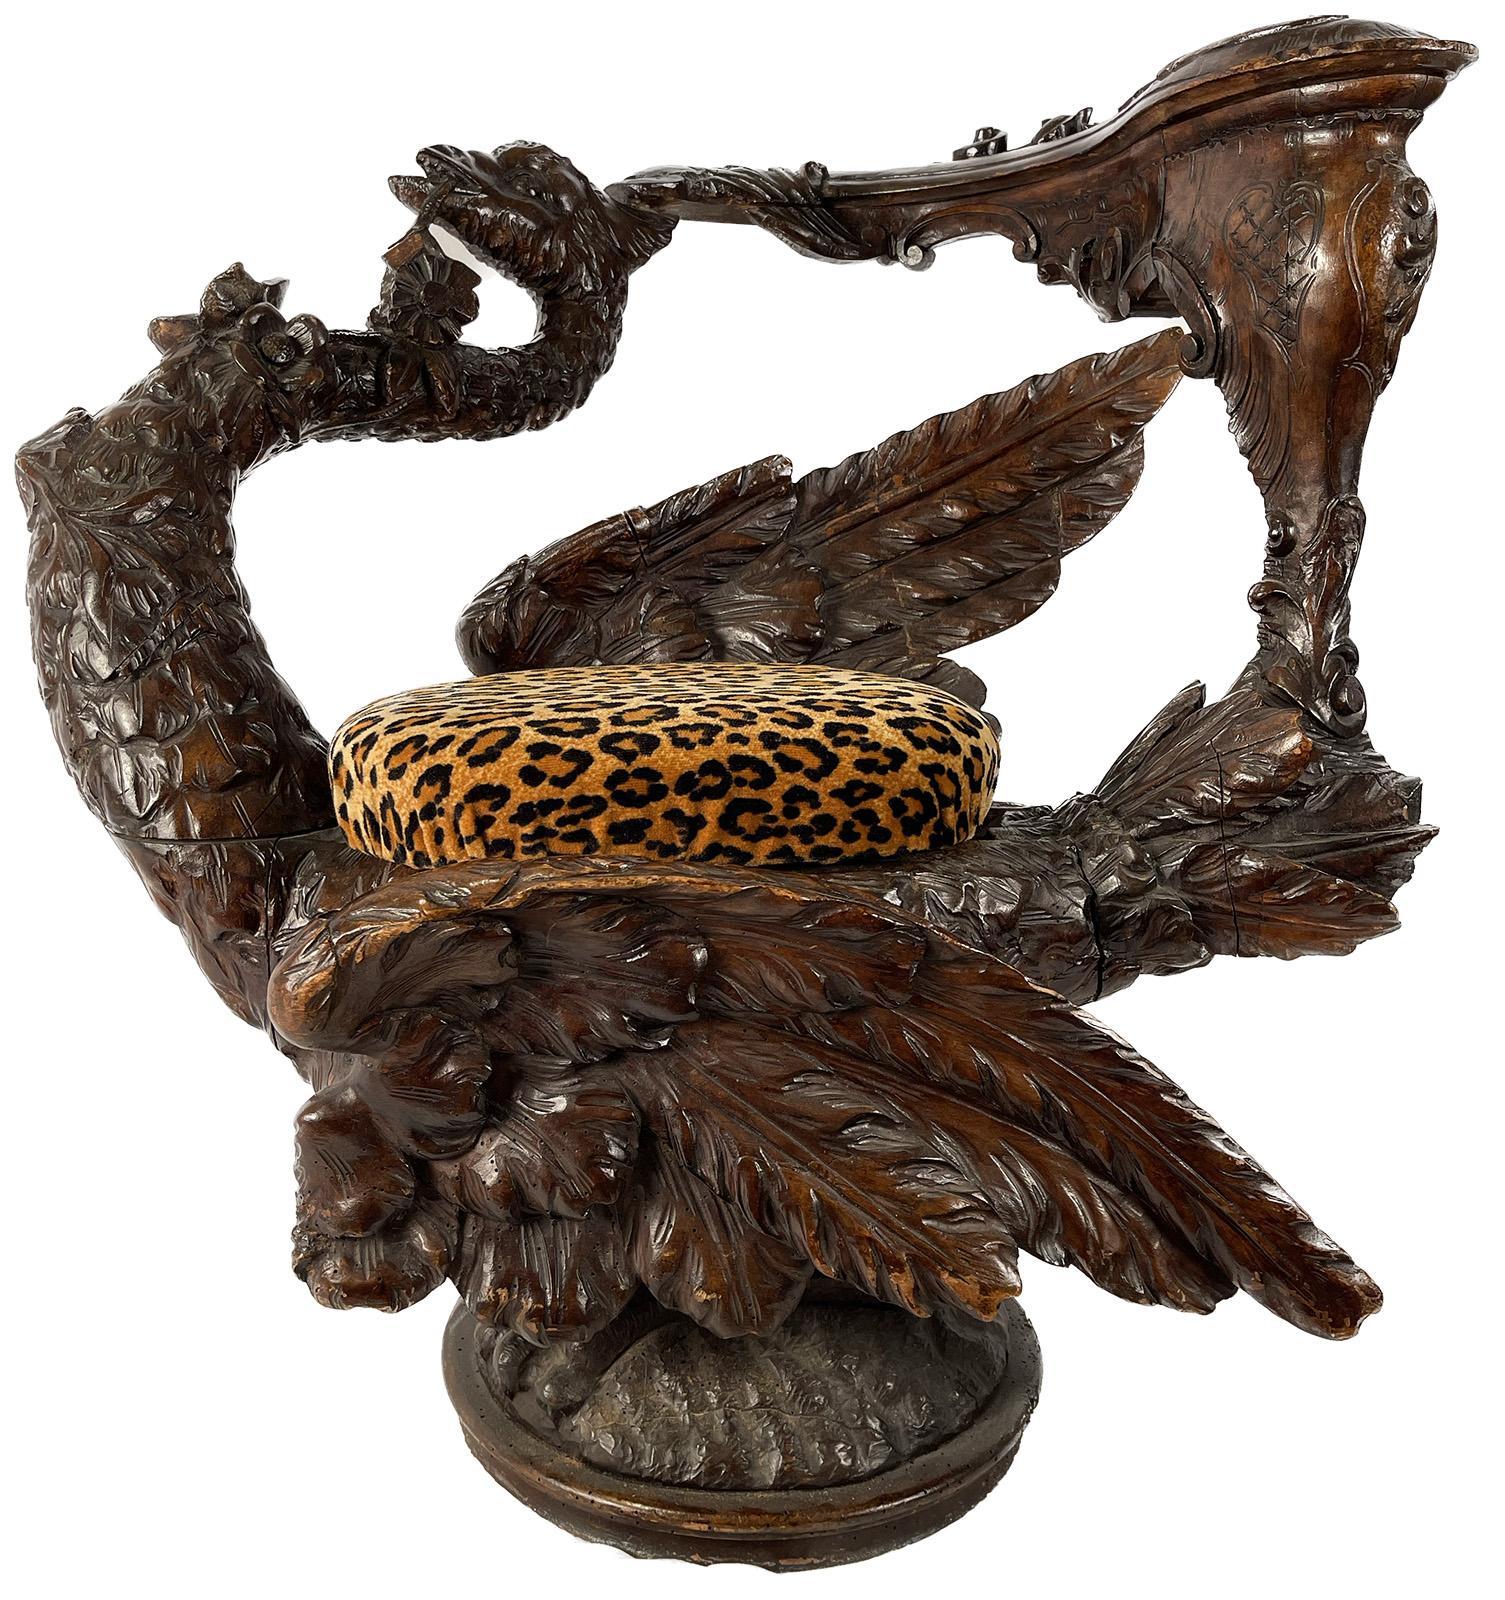 A Venetian style carved crane stool with a velvet leopard cushion.

Dimensions: 27